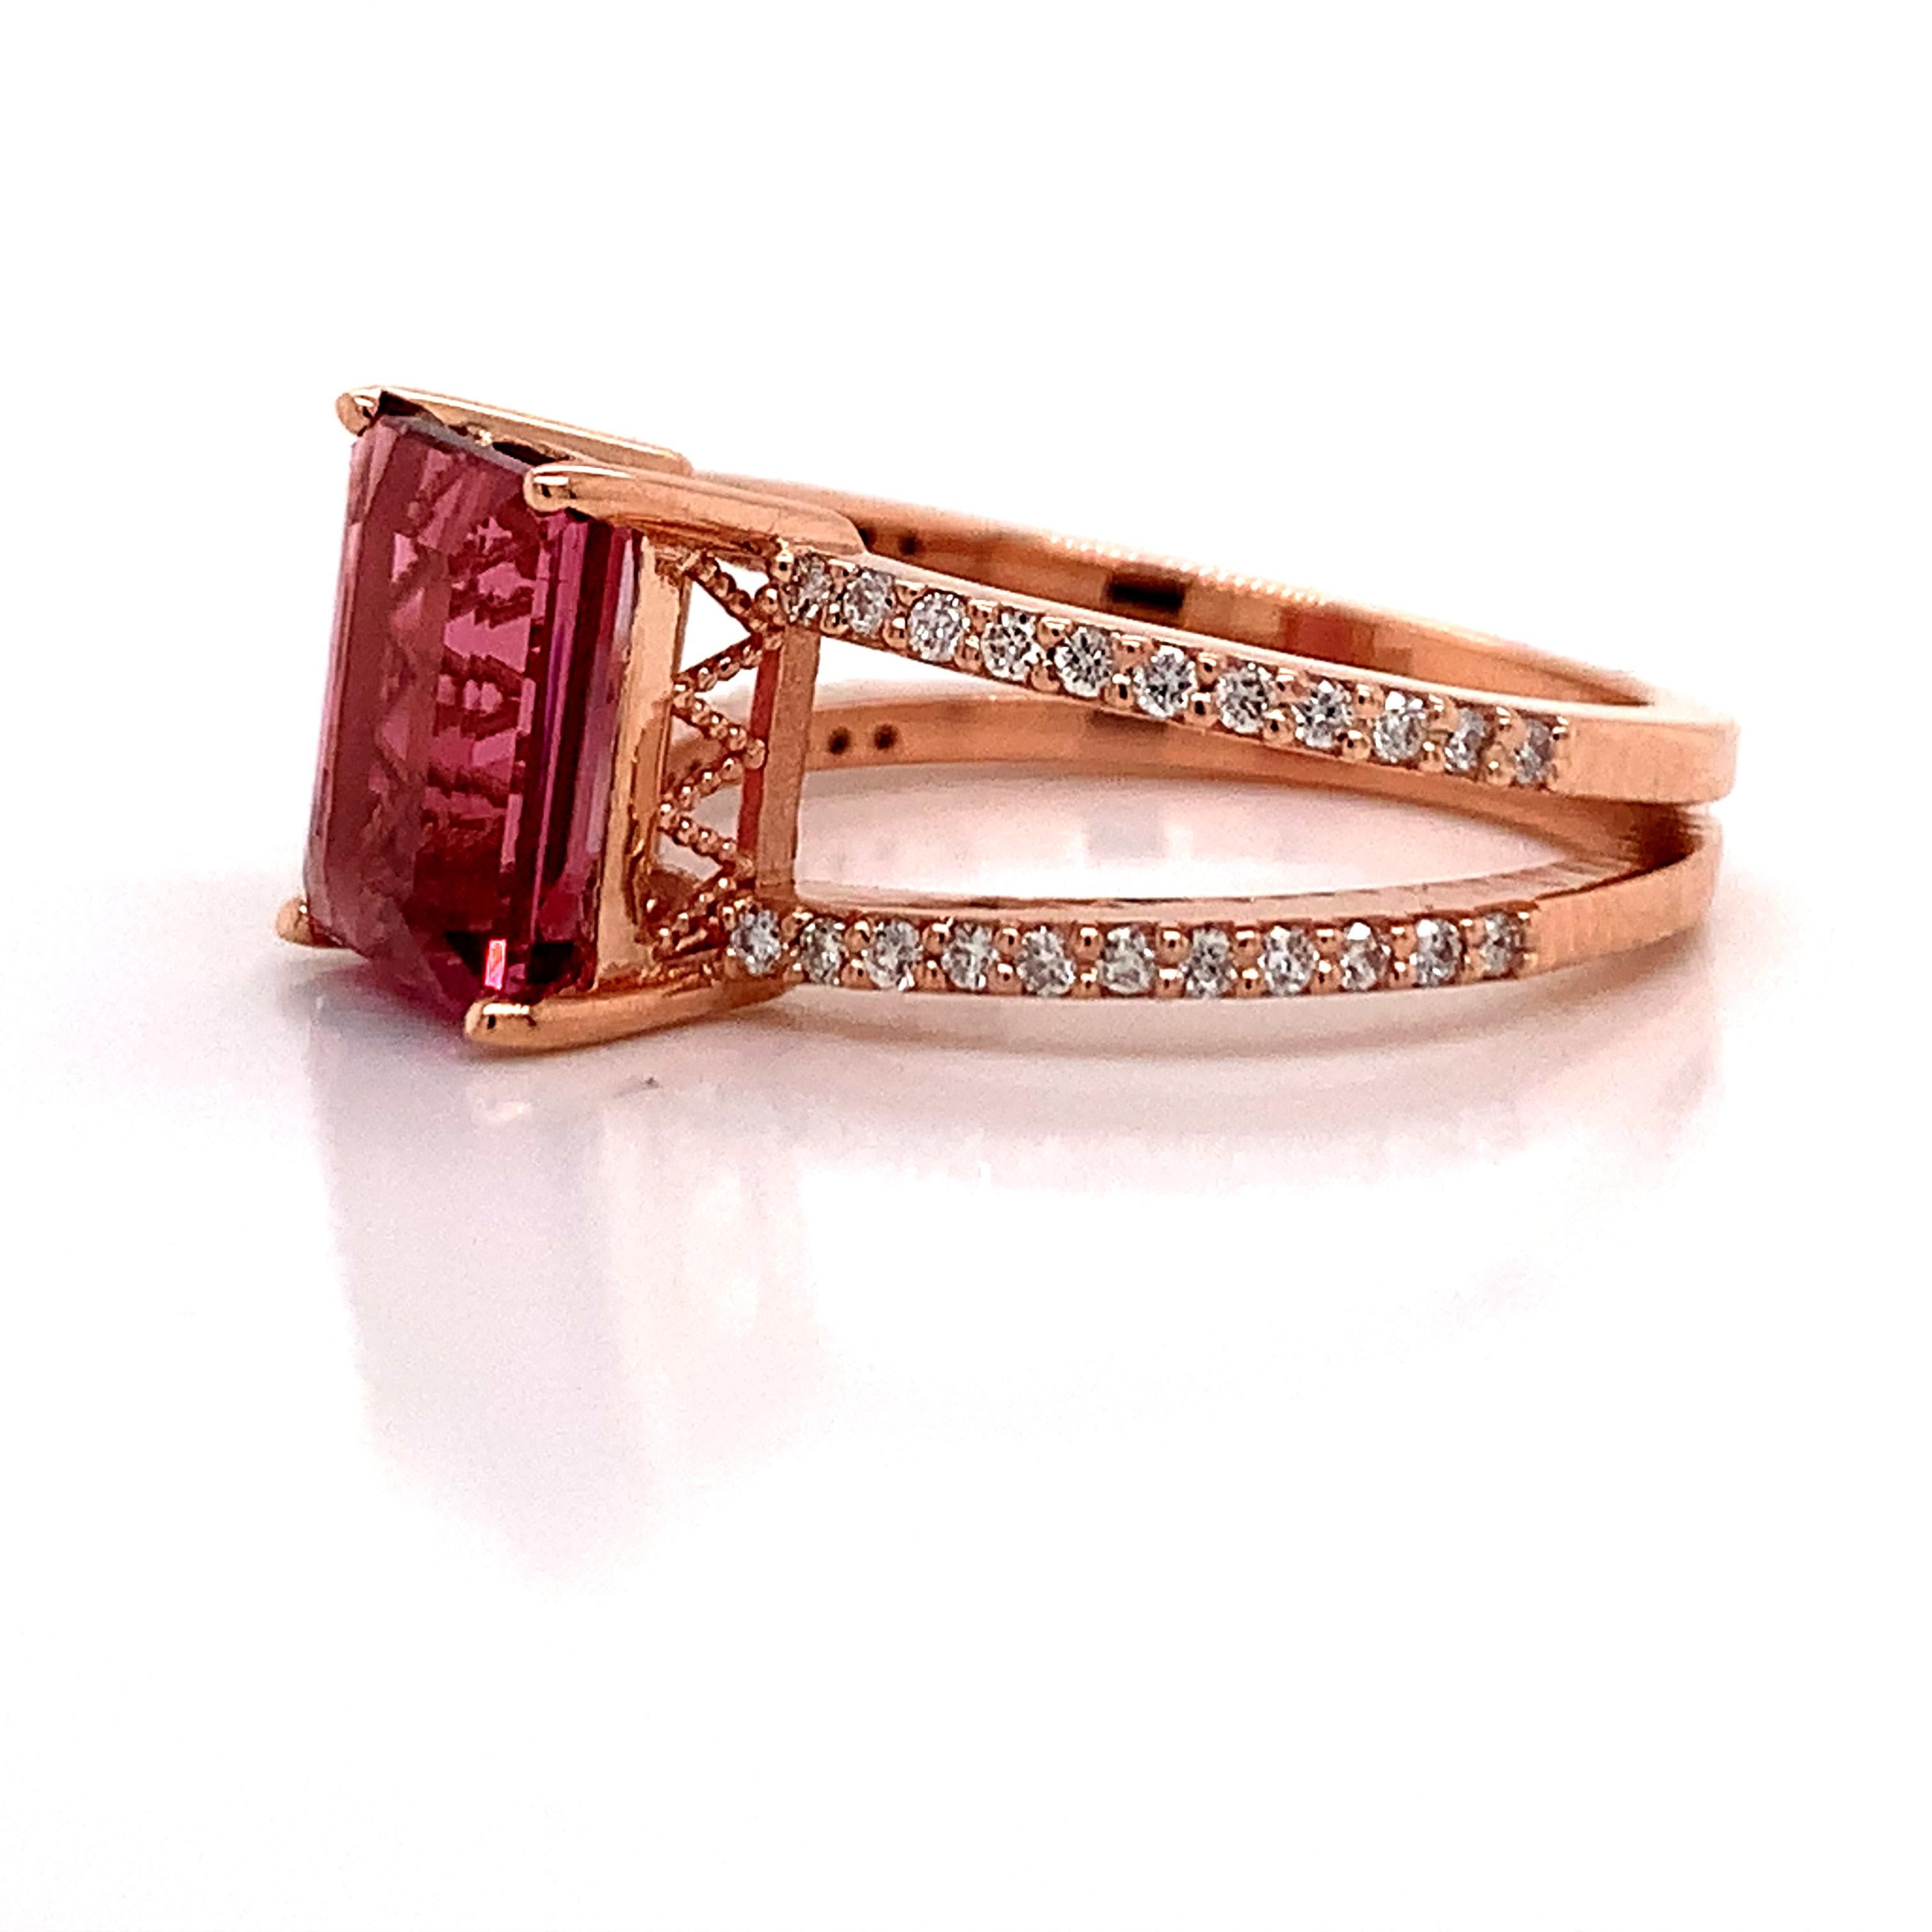 Natural Tourmaline Diamond Ring 14k Rose Gold 2.2 TCW Certified For Sale 8